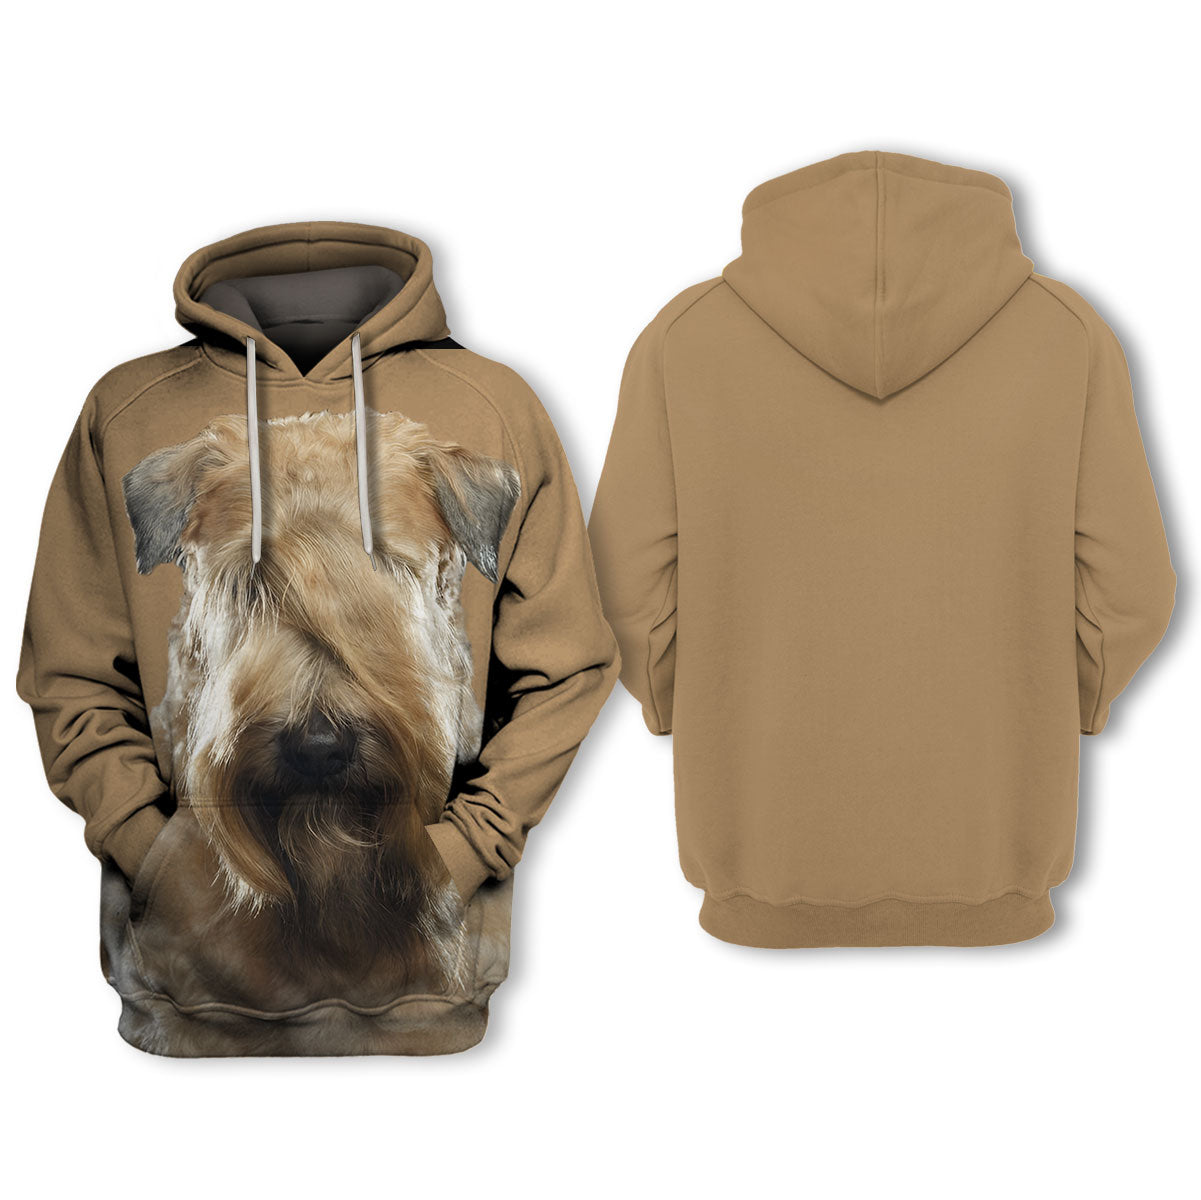 Soft-coated Wheaten Terrier - Unisex 3D Graphic Hoodie